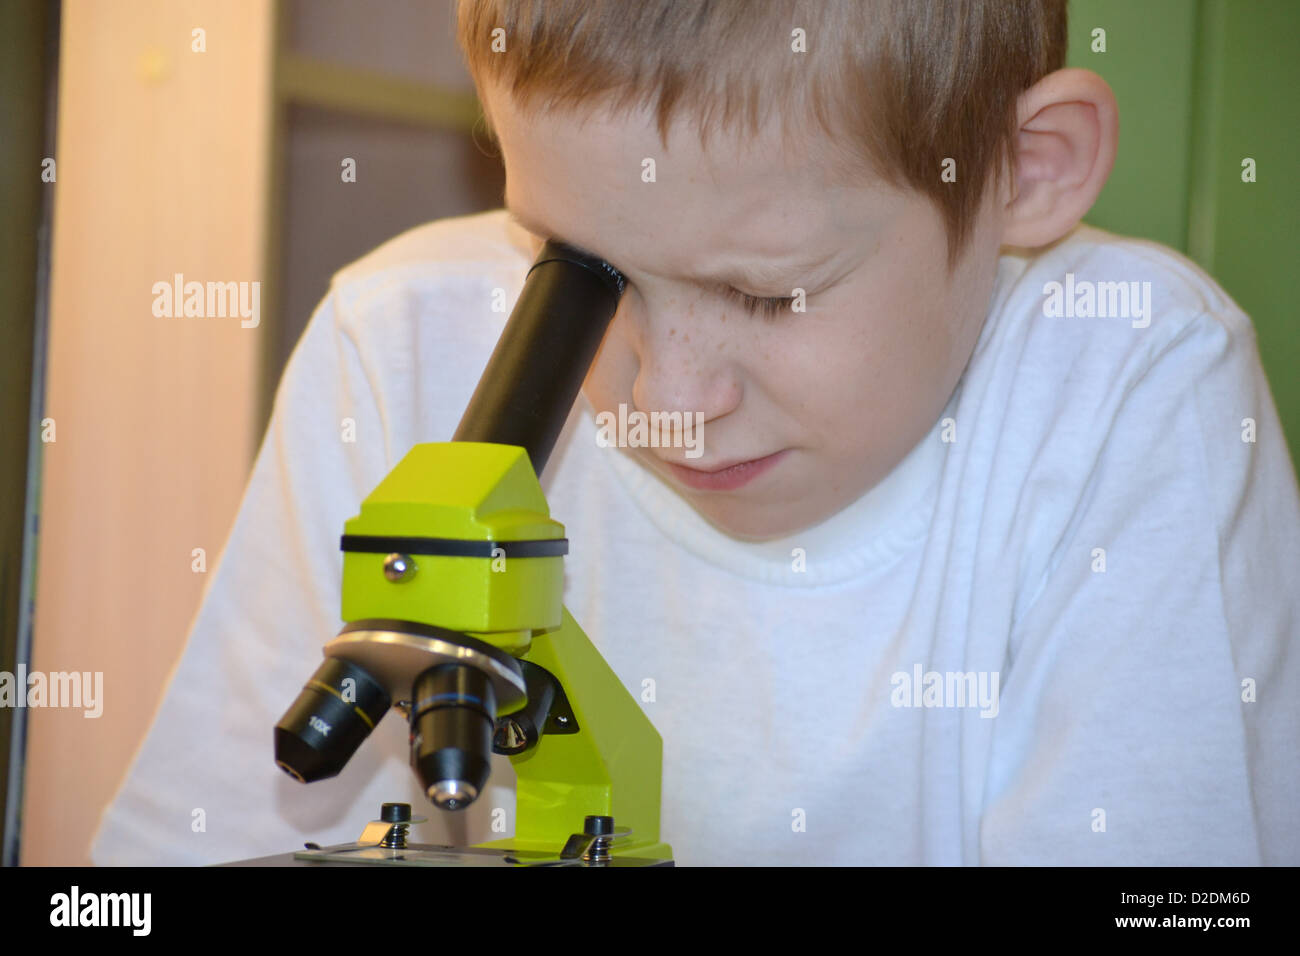 the boy with a microscope Stock Photo